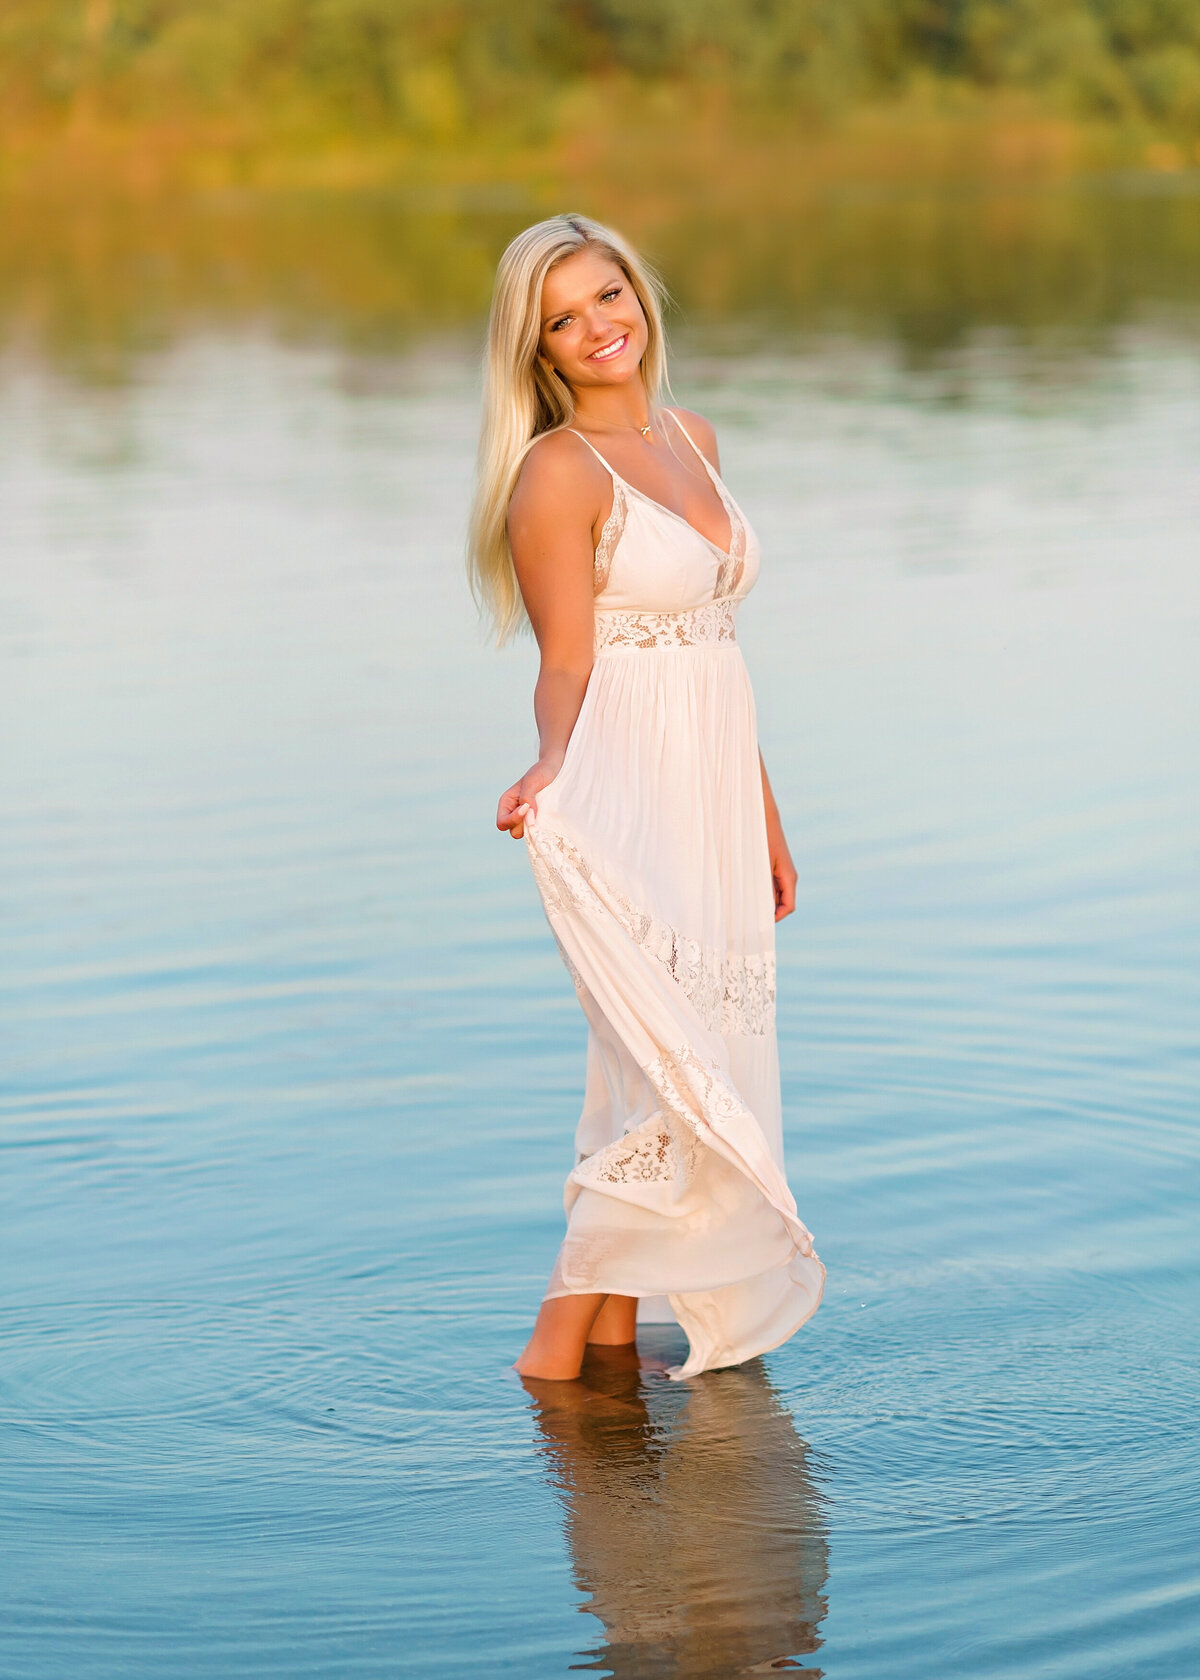 Des-Moines-Iowa-Senior-Theresa-Schumacher-Photography-Girl-Nature-Water-Maddy